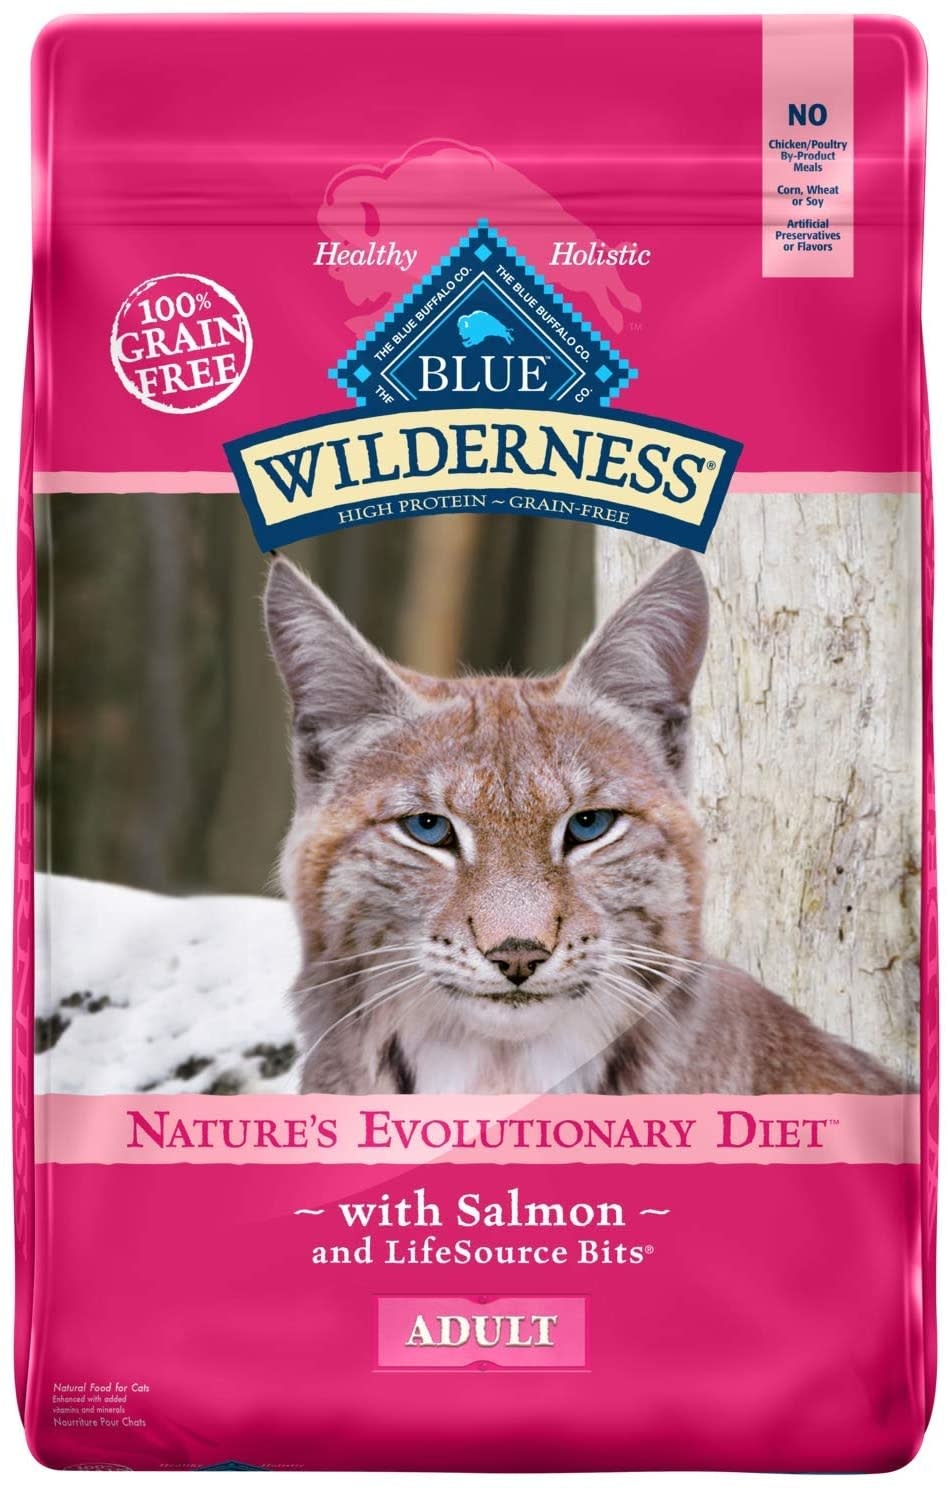 blue-wilderness-wet-cat-food-recall-cat-meme-stock-pictures-and-photos